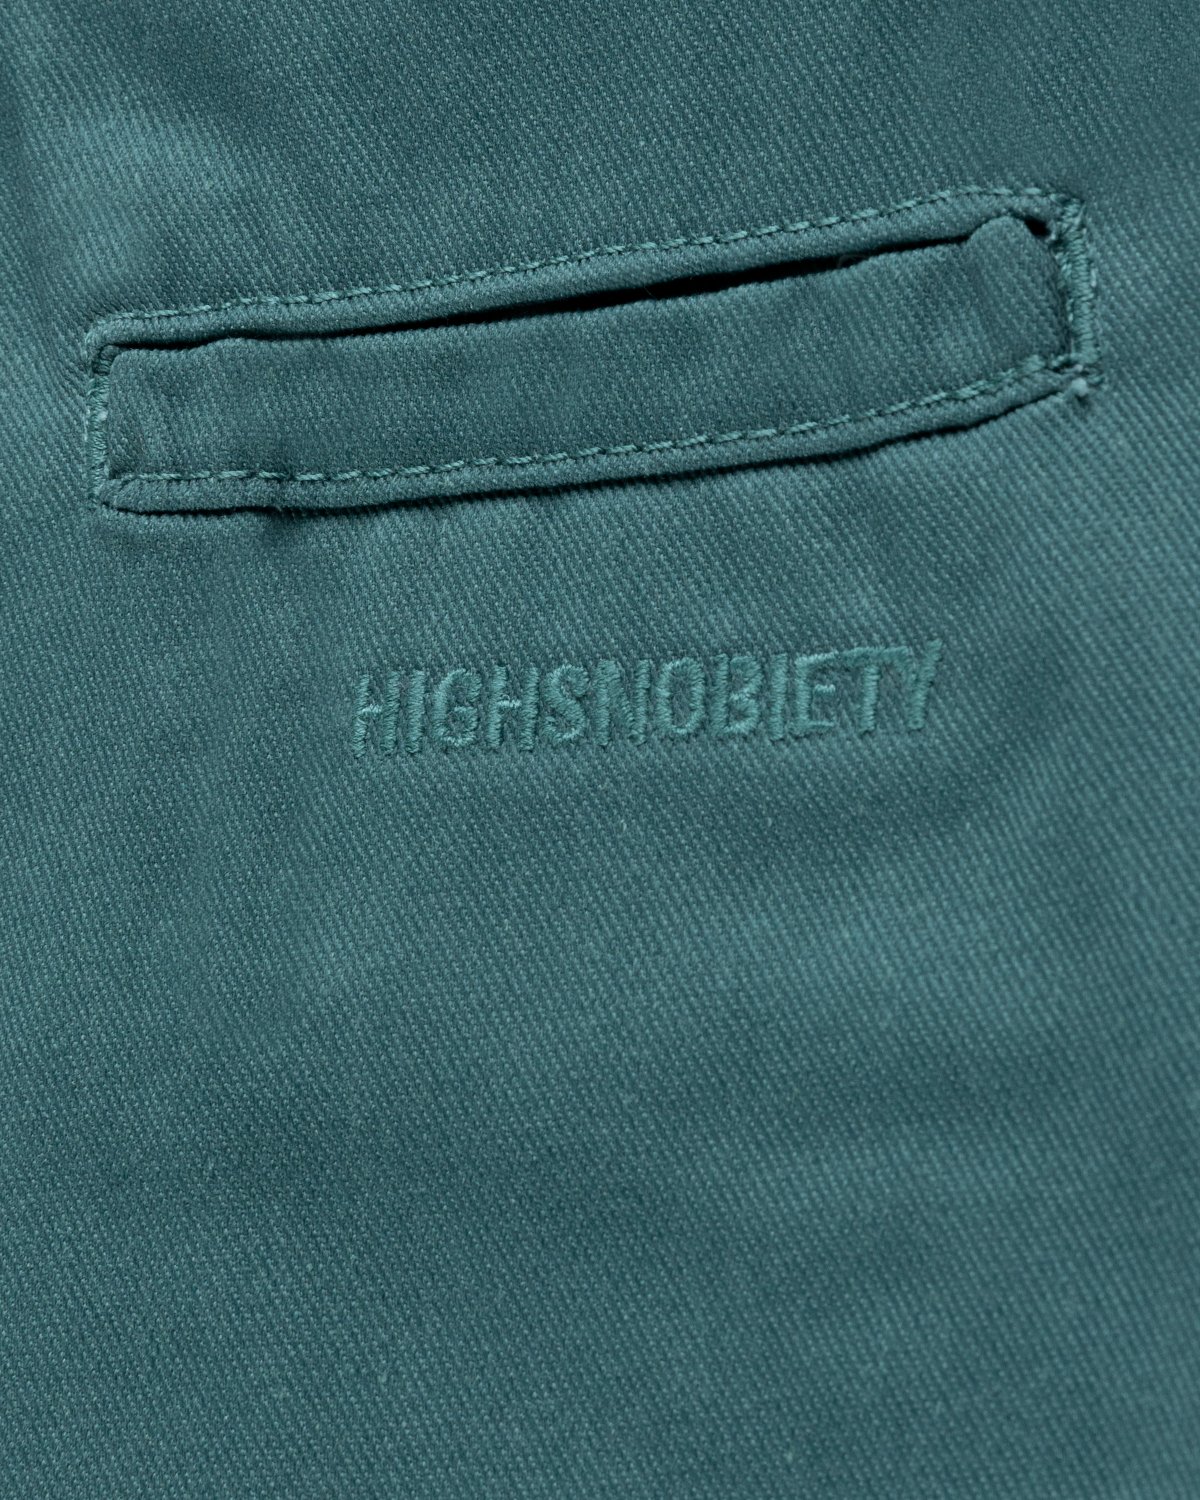 Highsnobiety x Dickies - Pleated Work Pants Lincoln Green - Clothing - Green - Image 4